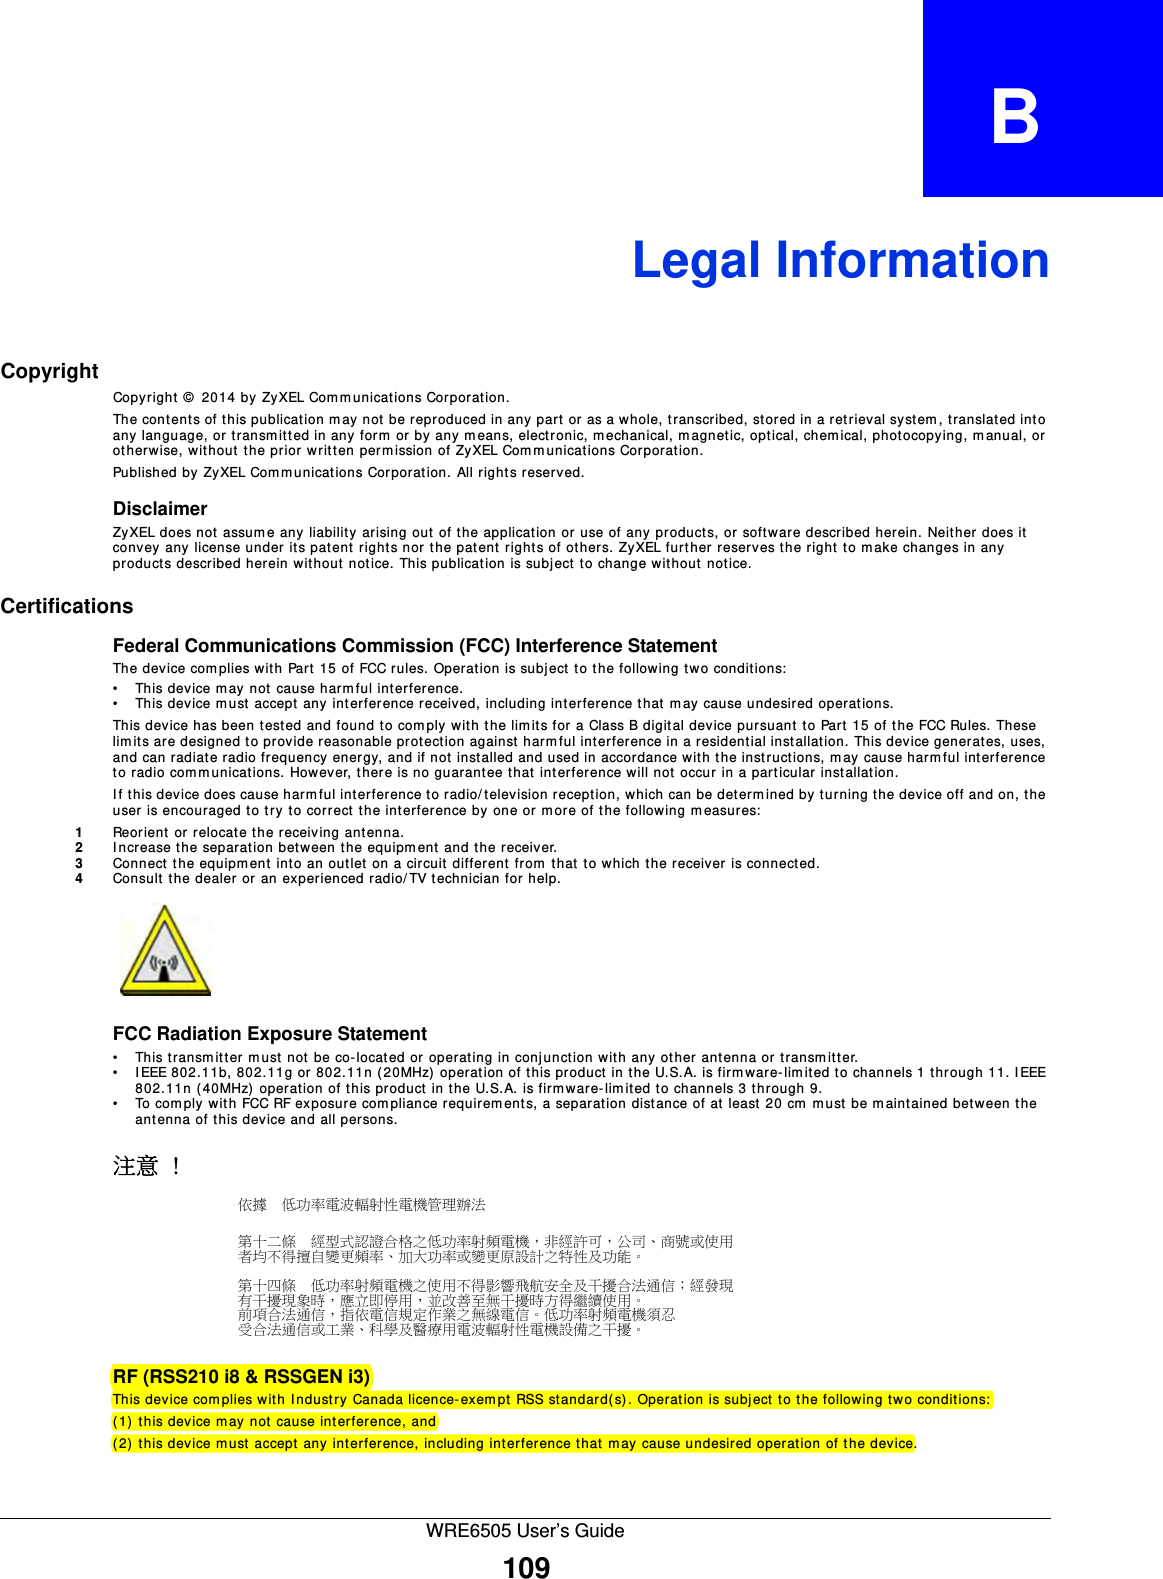 WRE6505 User’s Guide109APPENDIX   BLegal InformationCopyrightCopyright ©  2014 by ZyXEL Com munications Corporation.The cont ent s of t his publication m ay not  be r eproduced in any  part  or as a w hole, t ranscribed, stored in a r et rieval syst em,  translated into any language, or transm itt ed in any form  or by any m eans, electronic, m echanical, magnetic, optical, chemical, phot ocopying, m anual, or otherwise, without the prior written permission of ZyXEL Communications Corporation.Published by ZyXEL Com m unications Corporat ion. All rights reserved.DisclaimerZyXEL does not assume any liability arising out of the application or use of any products, or software described herein. Neither does it convey any license under its patent rights nor the pat ent rights of others. ZyXEL further reserves t he right to m ake changes in any products described herein without notice. This publication is subject t o change without notice.CertificationsFederal Communications Commission (FCC) Interference StatementThe device complies with Part 15 of FCC rules. Operation is subject to the following two conditions:• This device may not cause harmful interference.• This device must accept any interference received, including int erference that may cause undesired operat ions.This device has been tested and found to com ply with t he lim its for a Class B digit al device pursuant to Part 15 of the FCC Rules. These lim its are designed to provide reasonable protect ion against harmful interference in a residential inst allation. This device generates, uses, and can radiate radio frequency energy, and if not installed and used in accordance with the instructions, m ay cause harm ful interference to radio communications. However, there is no guarant ee that interference will not occur in a particular installation.If t his device does cause harm ful interference to radio/ television reception, which can be determ ined by turning the device off and on, the user is encouraged to try to correct the interference by one or m ore of the following m easures:1Reorient or relocate the receiving ant enna.2Increase the separation between the equipment and the receiver.3Connect t he equipm ent into an outlet on a circuit different from  that to which the receiver is connect ed.4Consult t he dealer or an experienced radio/ TV t echnician for help.FCC Radiation Exposure Statement• This transm itt er must not be co-located or operating in conj unct ion with any other antenna or transm itter. • IEEE 802.11b, 802.11g or 802.11n (20MHz) operation of this product in the U.S.A. is firm ware-limited to channels 1 through 11. I EEE 802.11n ( 40MHz) operation of this product in the U.S.A. is firmware- lim it ed to channels 3 through 9.• To com ply with FCC RF exposure compliance requirem ents, a separation dist ance of at least 20 cm m ust  be maintained bet ween the antenna of this device and all persons. 注意 !依據  低󰥈率電波輻射性電機管理辦法第十二條  經型式認證合格之低󰥈率射頻電機，非經許可，公司商號或使用者均不得擅自變更頻率󰥉大󰥈率或變更原設計之特性及󰥈能第十四條  低󰥈率射頻電機之使用不得影響飛航安全及干擾合法通信；經發現有干擾現象時，應立即停用，並改善至無干擾時方得繼續使用前項合法通信，指依電信規定作業之無線電信低󰥈率射頻電機須忍受合法通信或工業科學及醫療用電波輻射性電機設備之干擾 RF (RSS210 i8 &amp; RSSGEN i3)This device complies with I ndustry Canada licence-exem pt RSS standard(s) . Operation is subject to the following two conditions:  (1) t his device may not cause interference, and (2) this device m ust accept any interference, including interference that m ay cause undesired operation of the device.